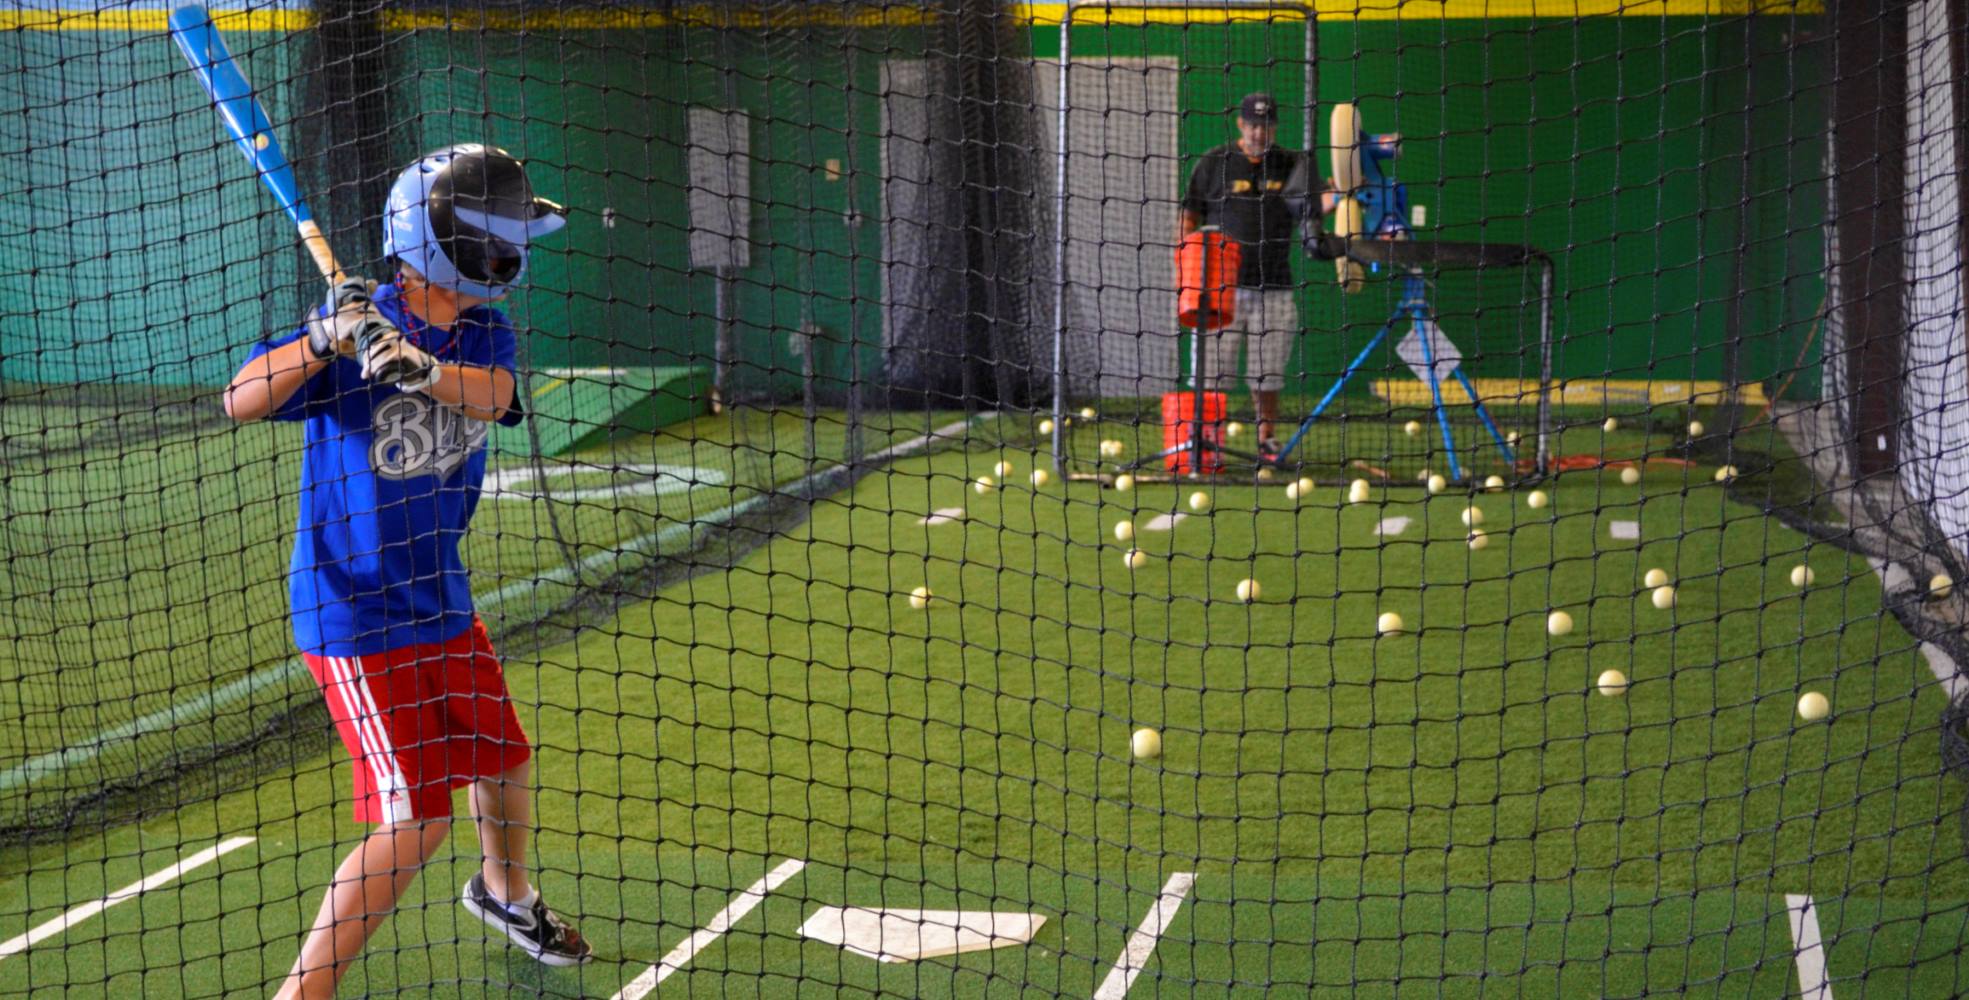 DIY Batting Cage: Step-by-Step Guide To Building Your Own Sports Practice Area